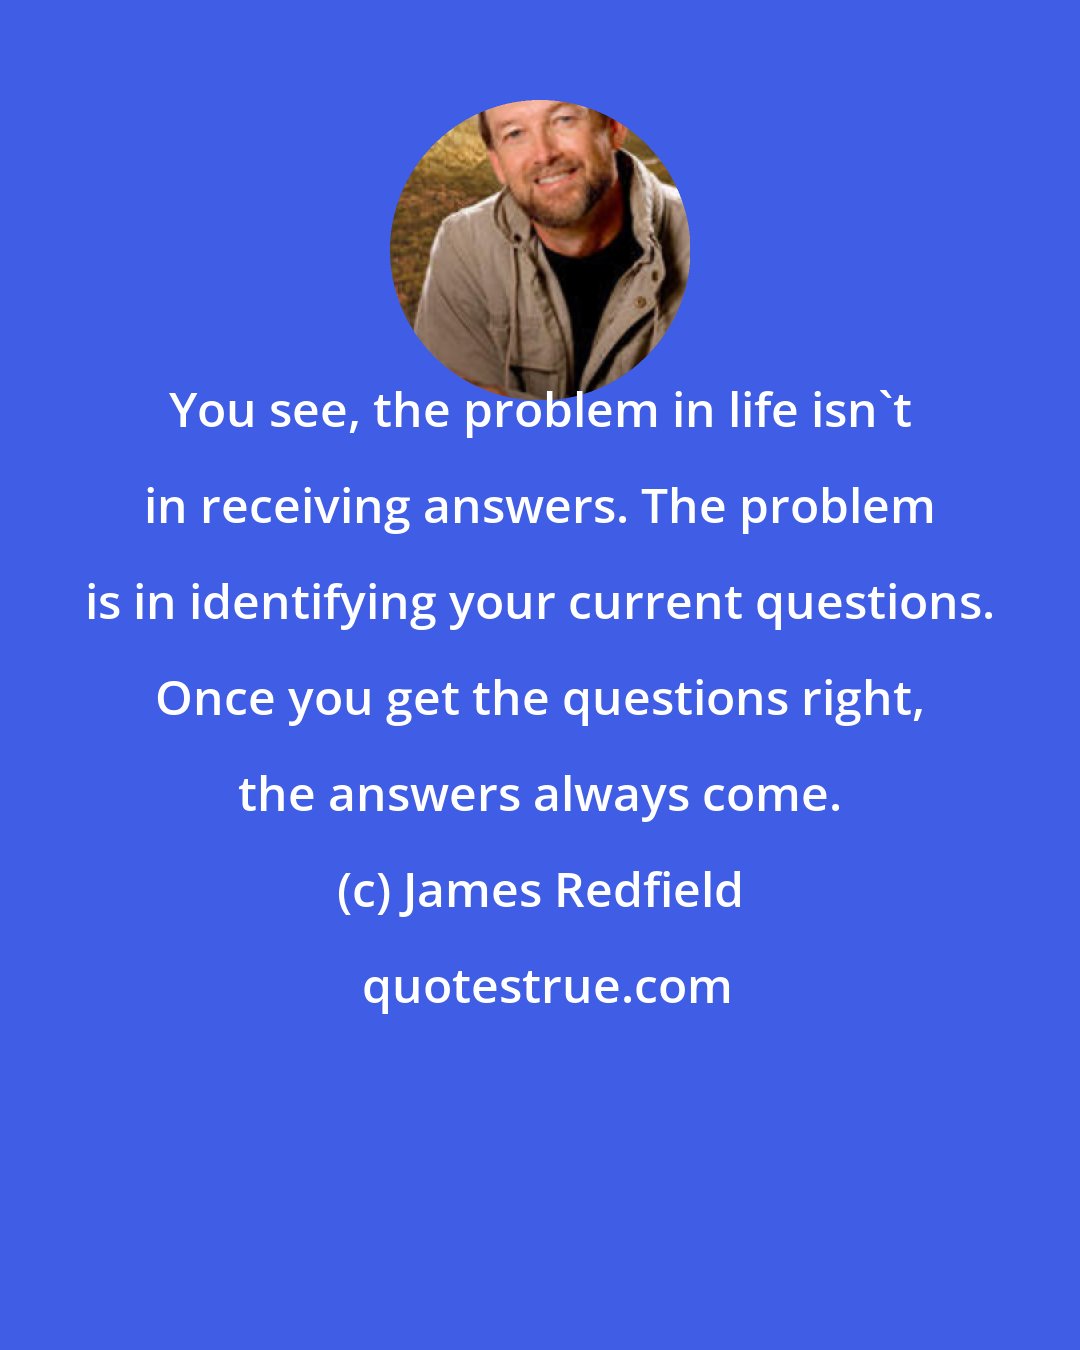 James Redfield: You see, the problem in life isn't in receiving answers. The problem is in identifying your current questions. Once you get the questions right, the answers always come.